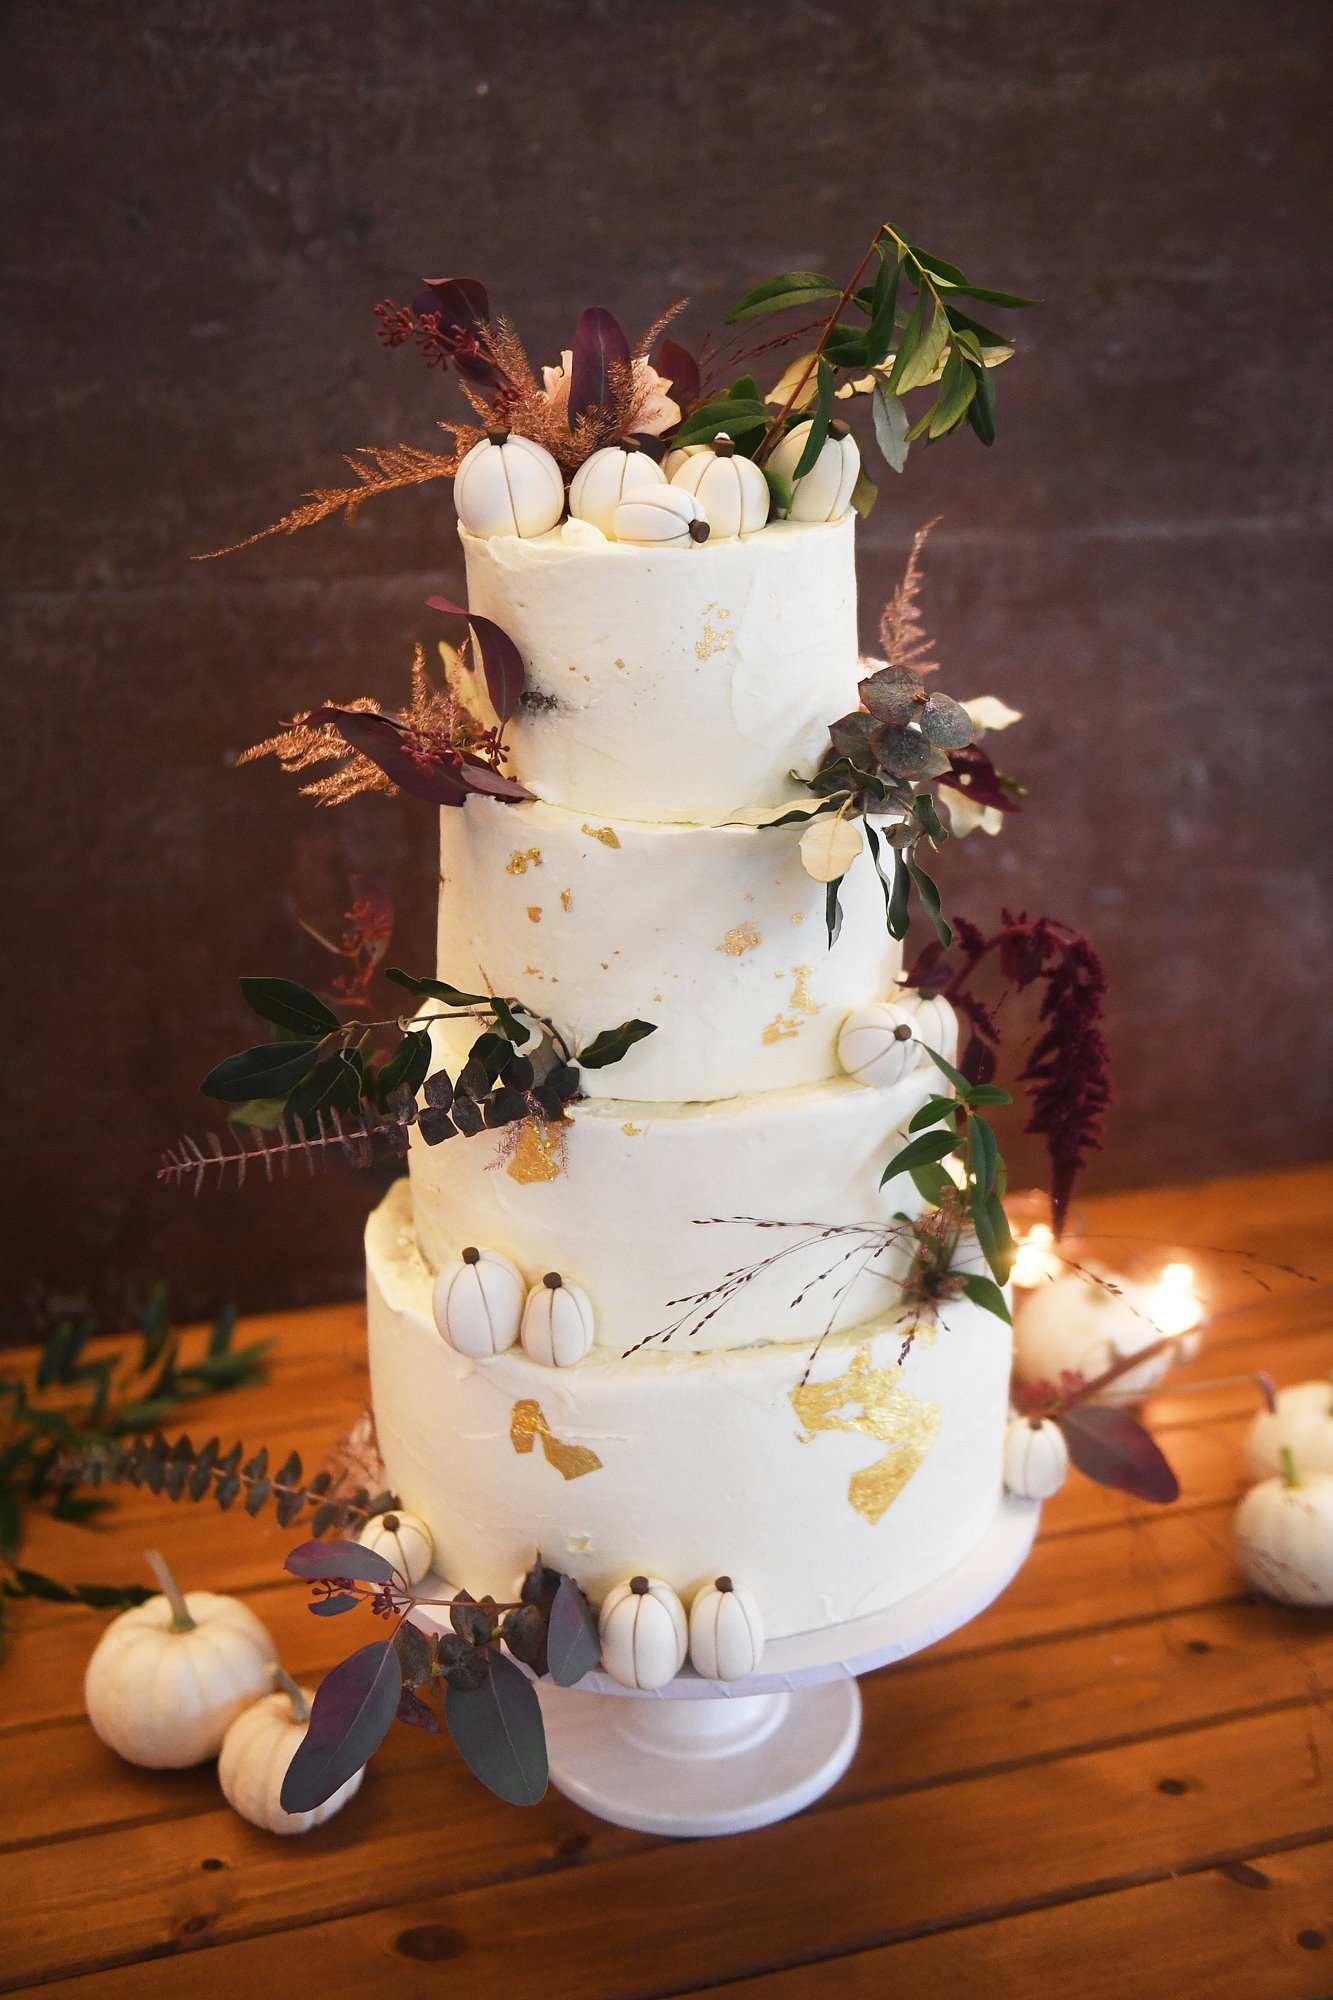 Pumpkin wedding cake with 4 tiers of flavours including pumpkin spice decorated with autumnal foliage and mini fondant pumpkins for an October wedding